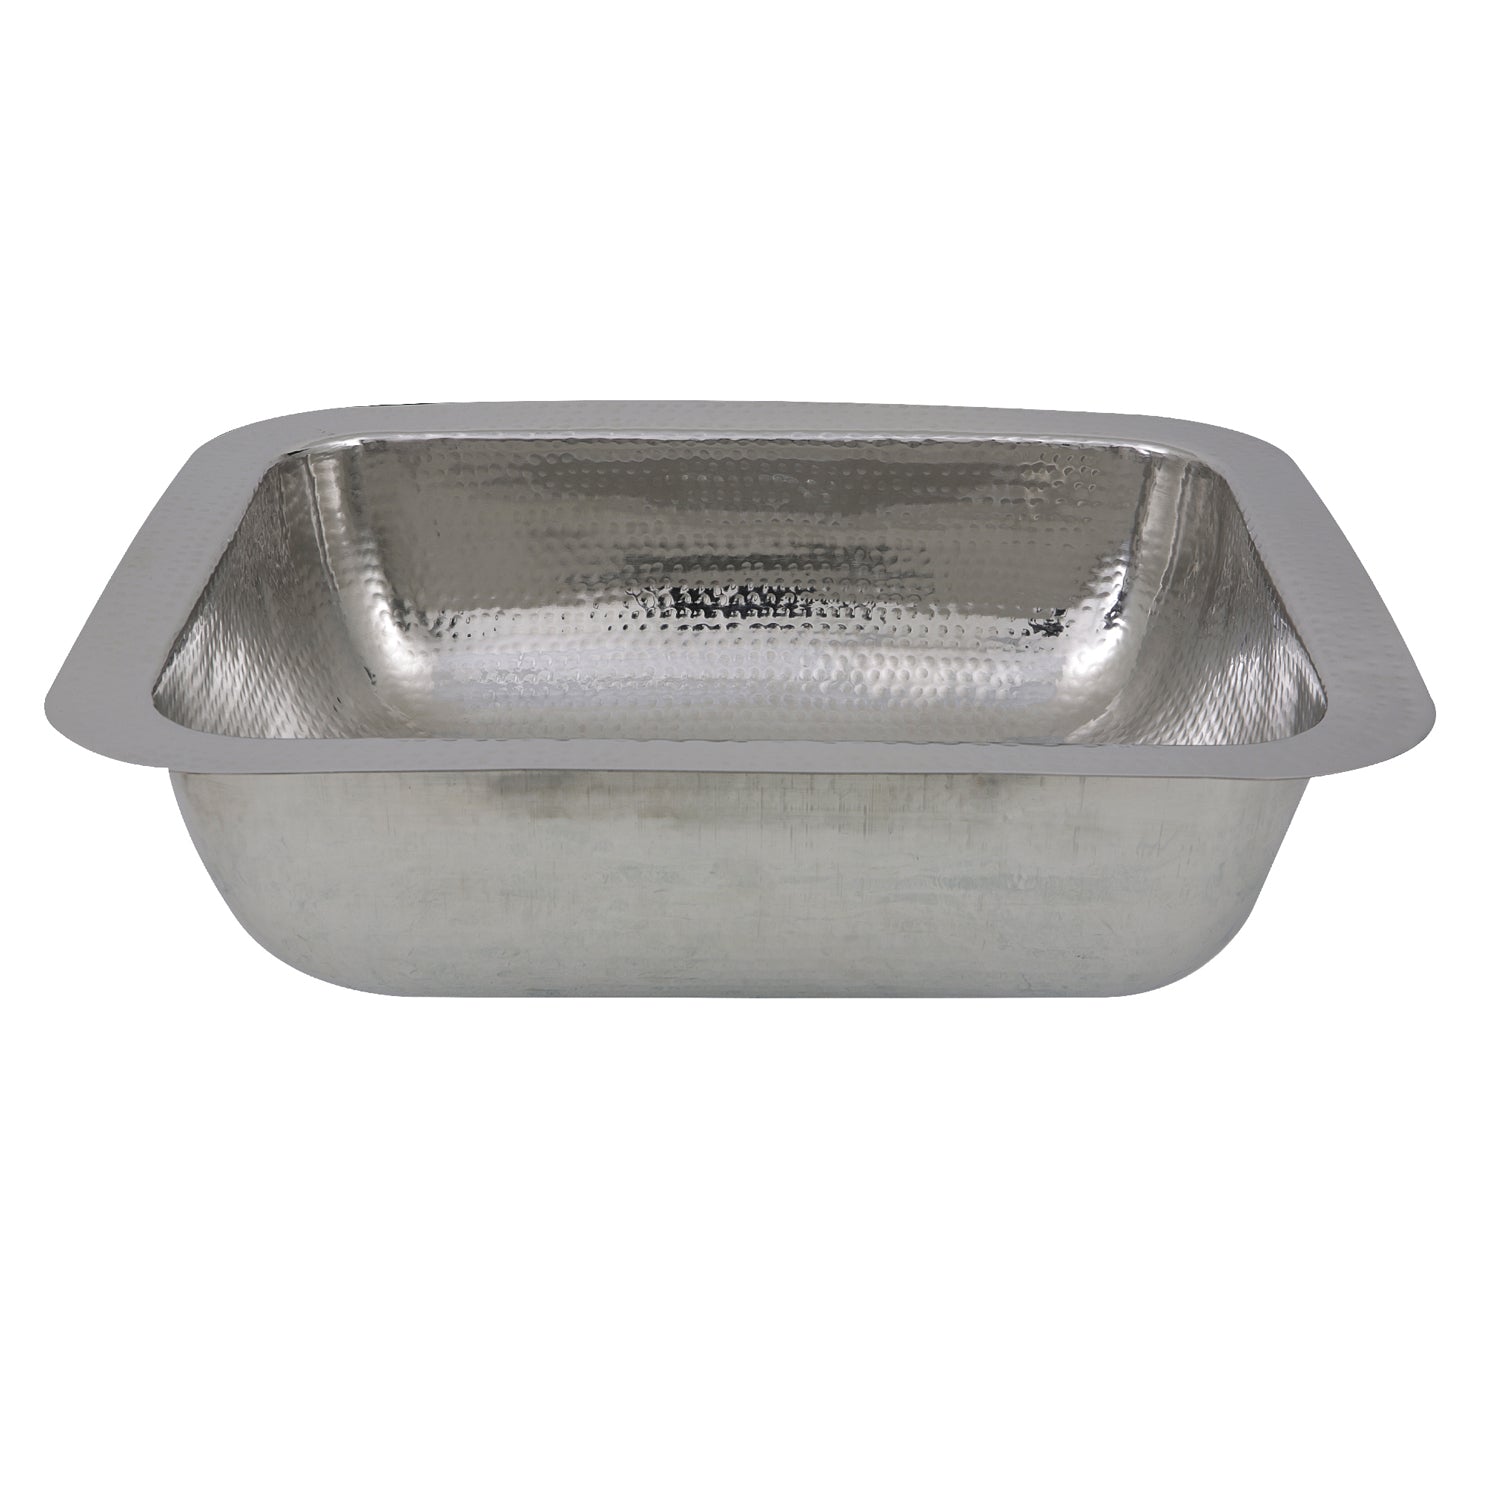 Nantucket Sinks RES - 17.5" Hammered Stainless Steel Rectangle Bar Sink